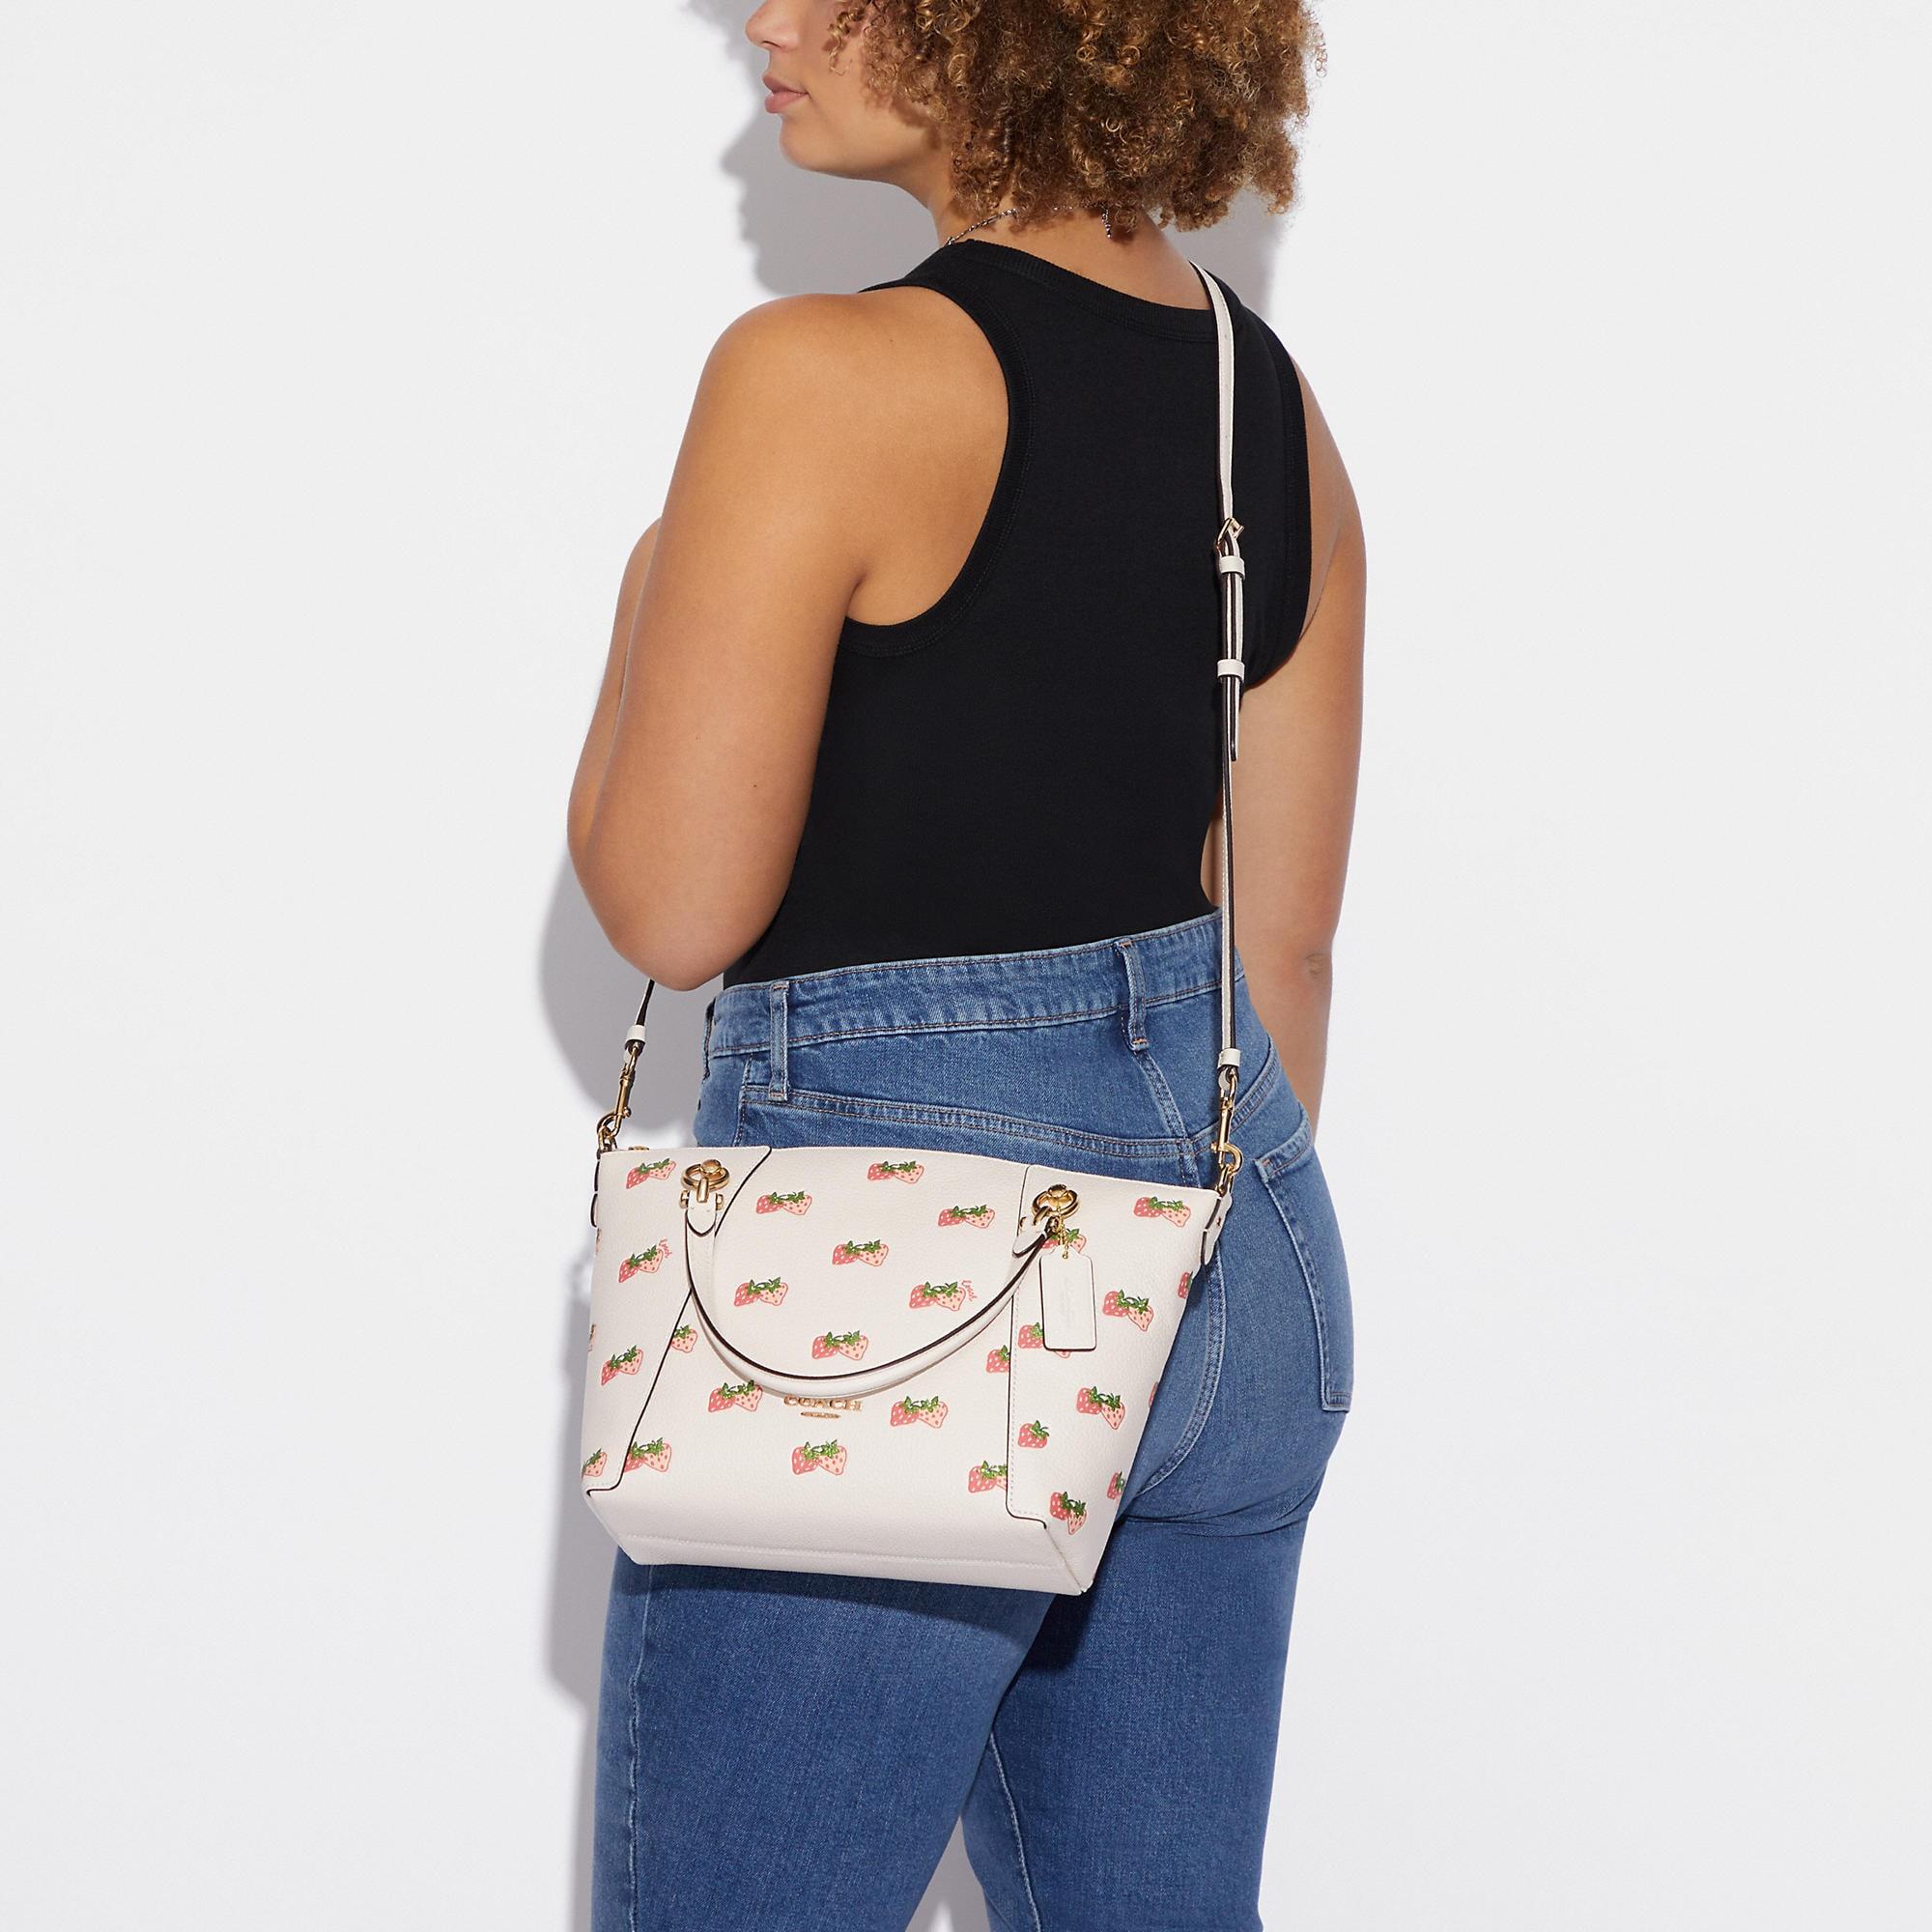 Coach Katy Satchel In Signature Canvas in 2023  White crossbody bag, Coach  crossbody bag, Satchel